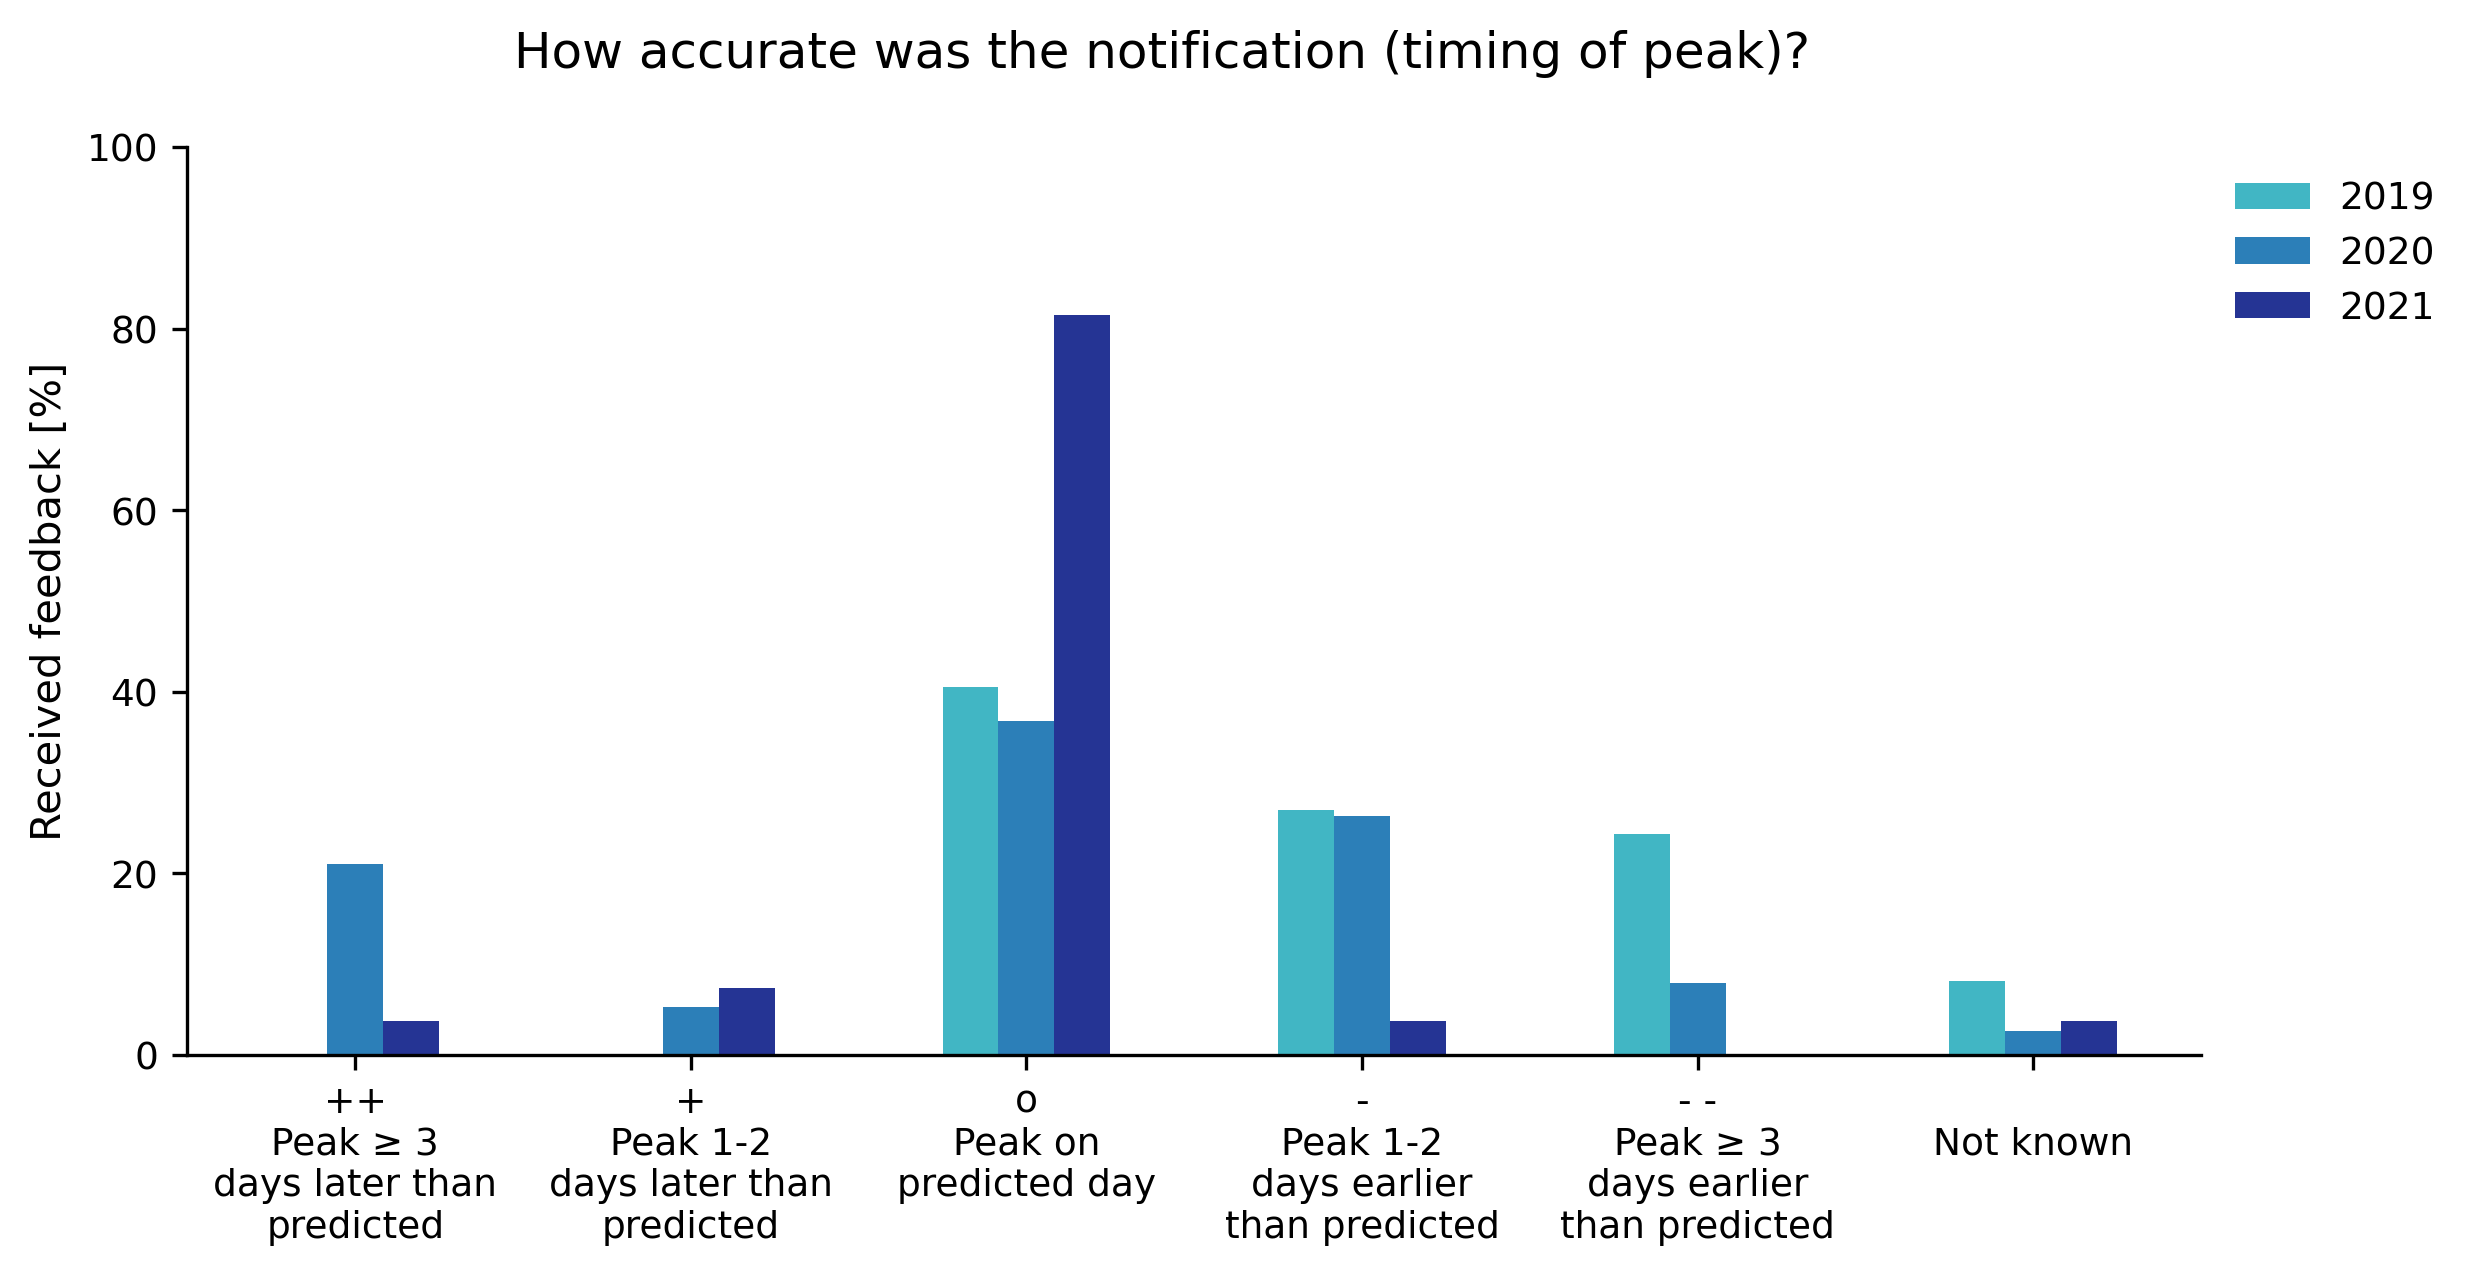 EFAS performance in terms of accurately predicting the peak time of an event